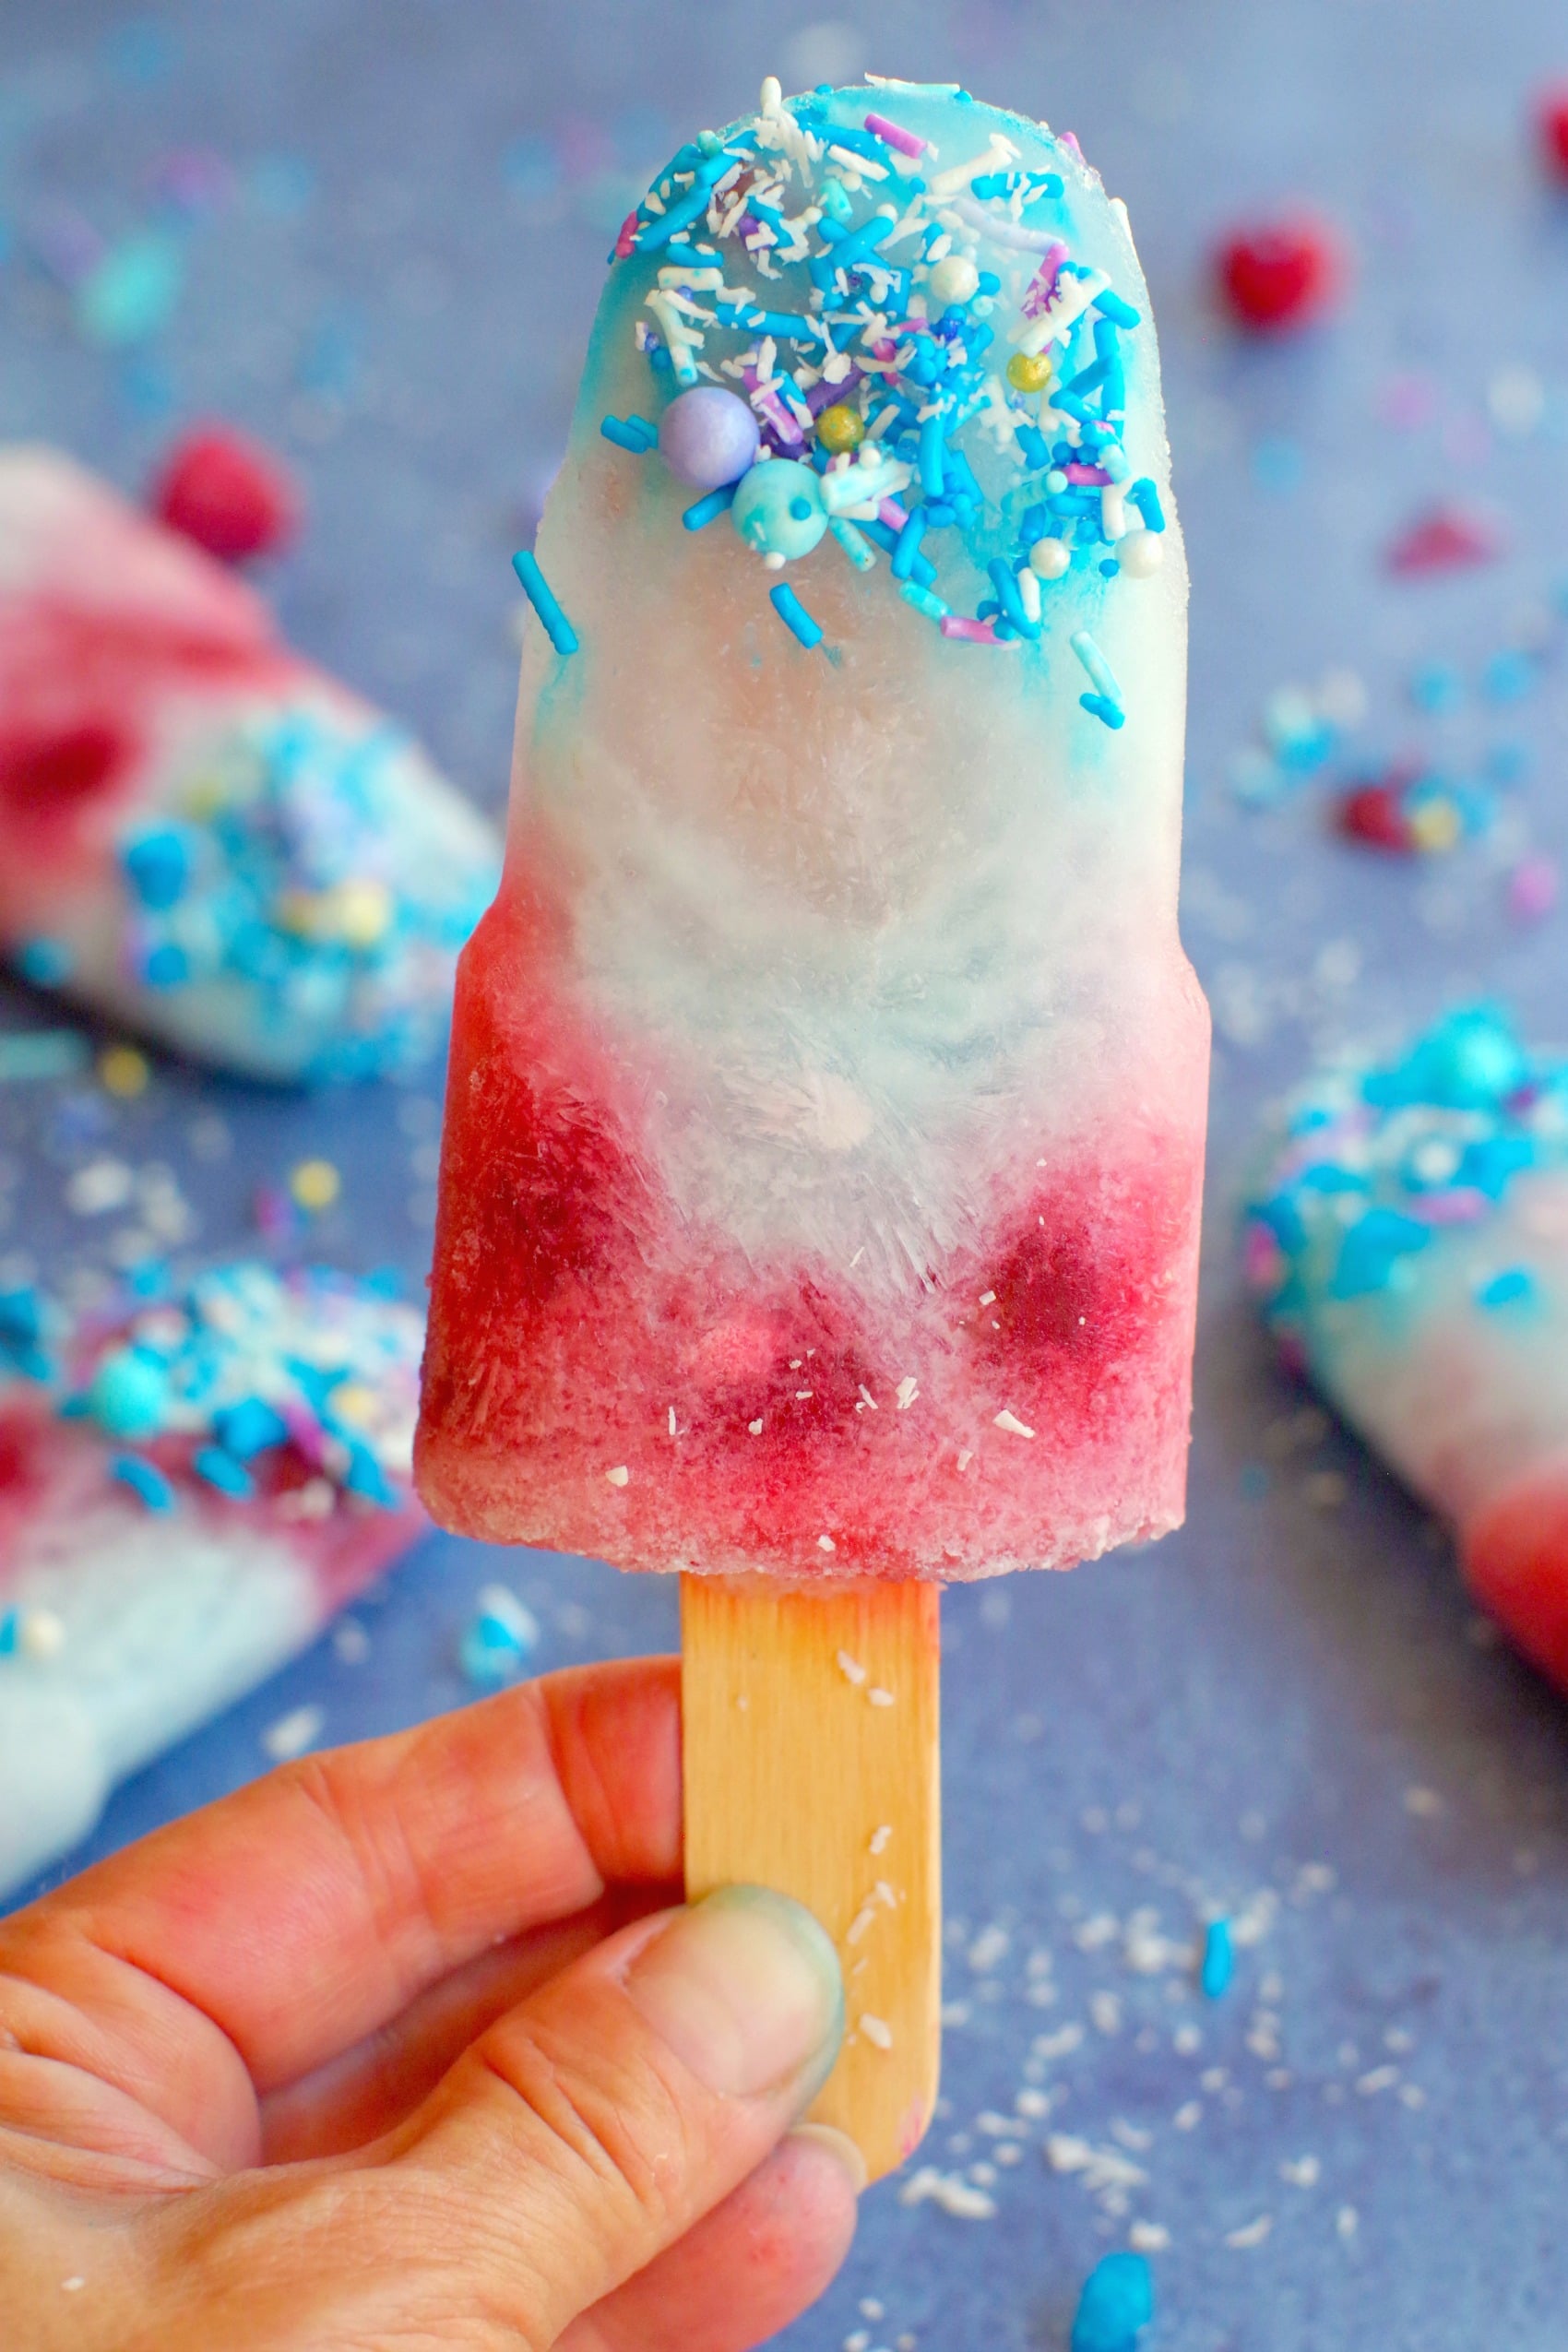 blue raspberry popsicle being held up